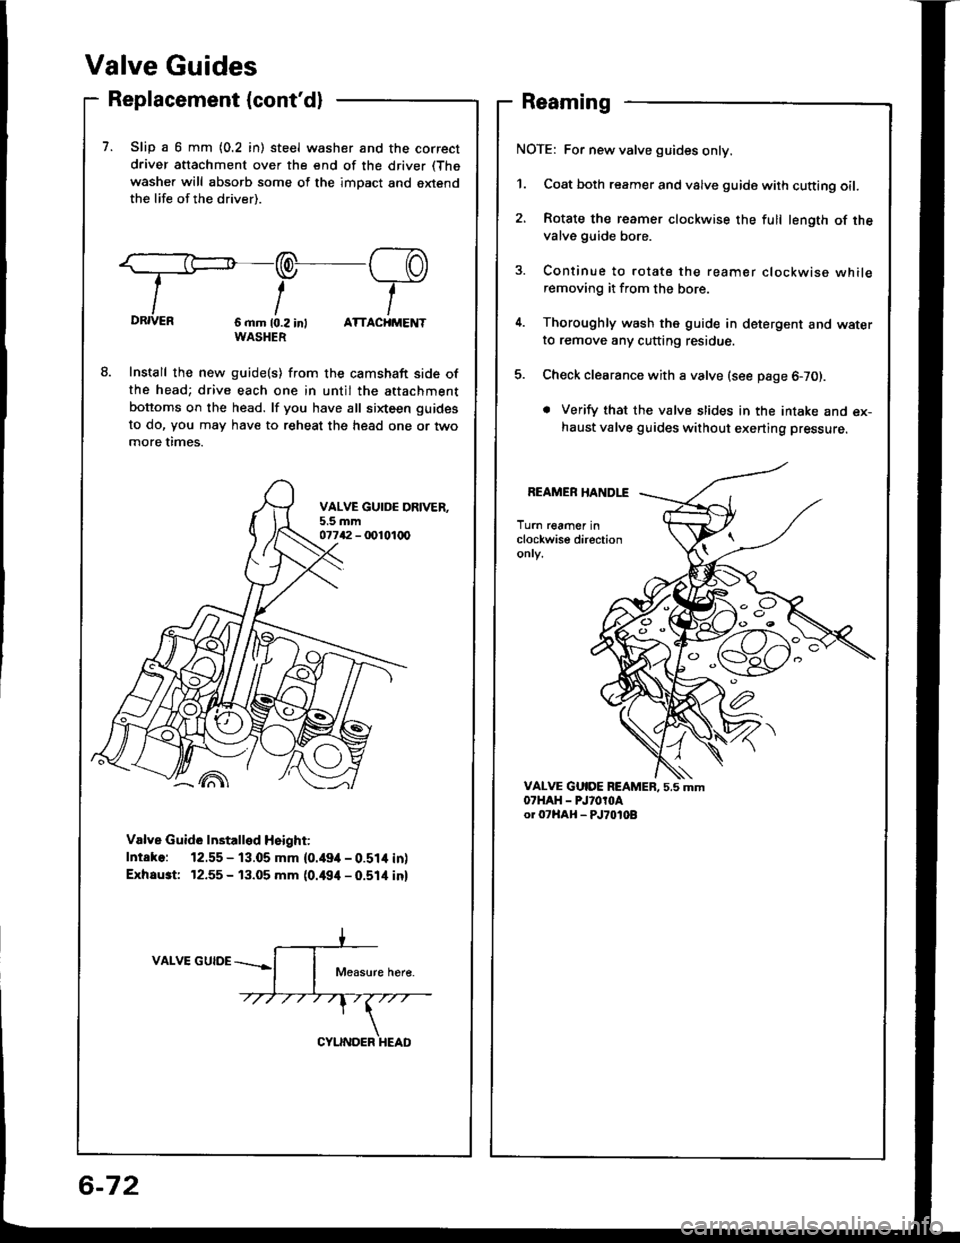 HONDA INTEGRA 1994 4.G Workshop Manual Valve Guides
Replacement (contdl
7. Slip a 6 mm {0.2 in) steel washer and the correct
driver attachment over the end of the driver (The
washer will absorb some of the imDact and extendthe life of the